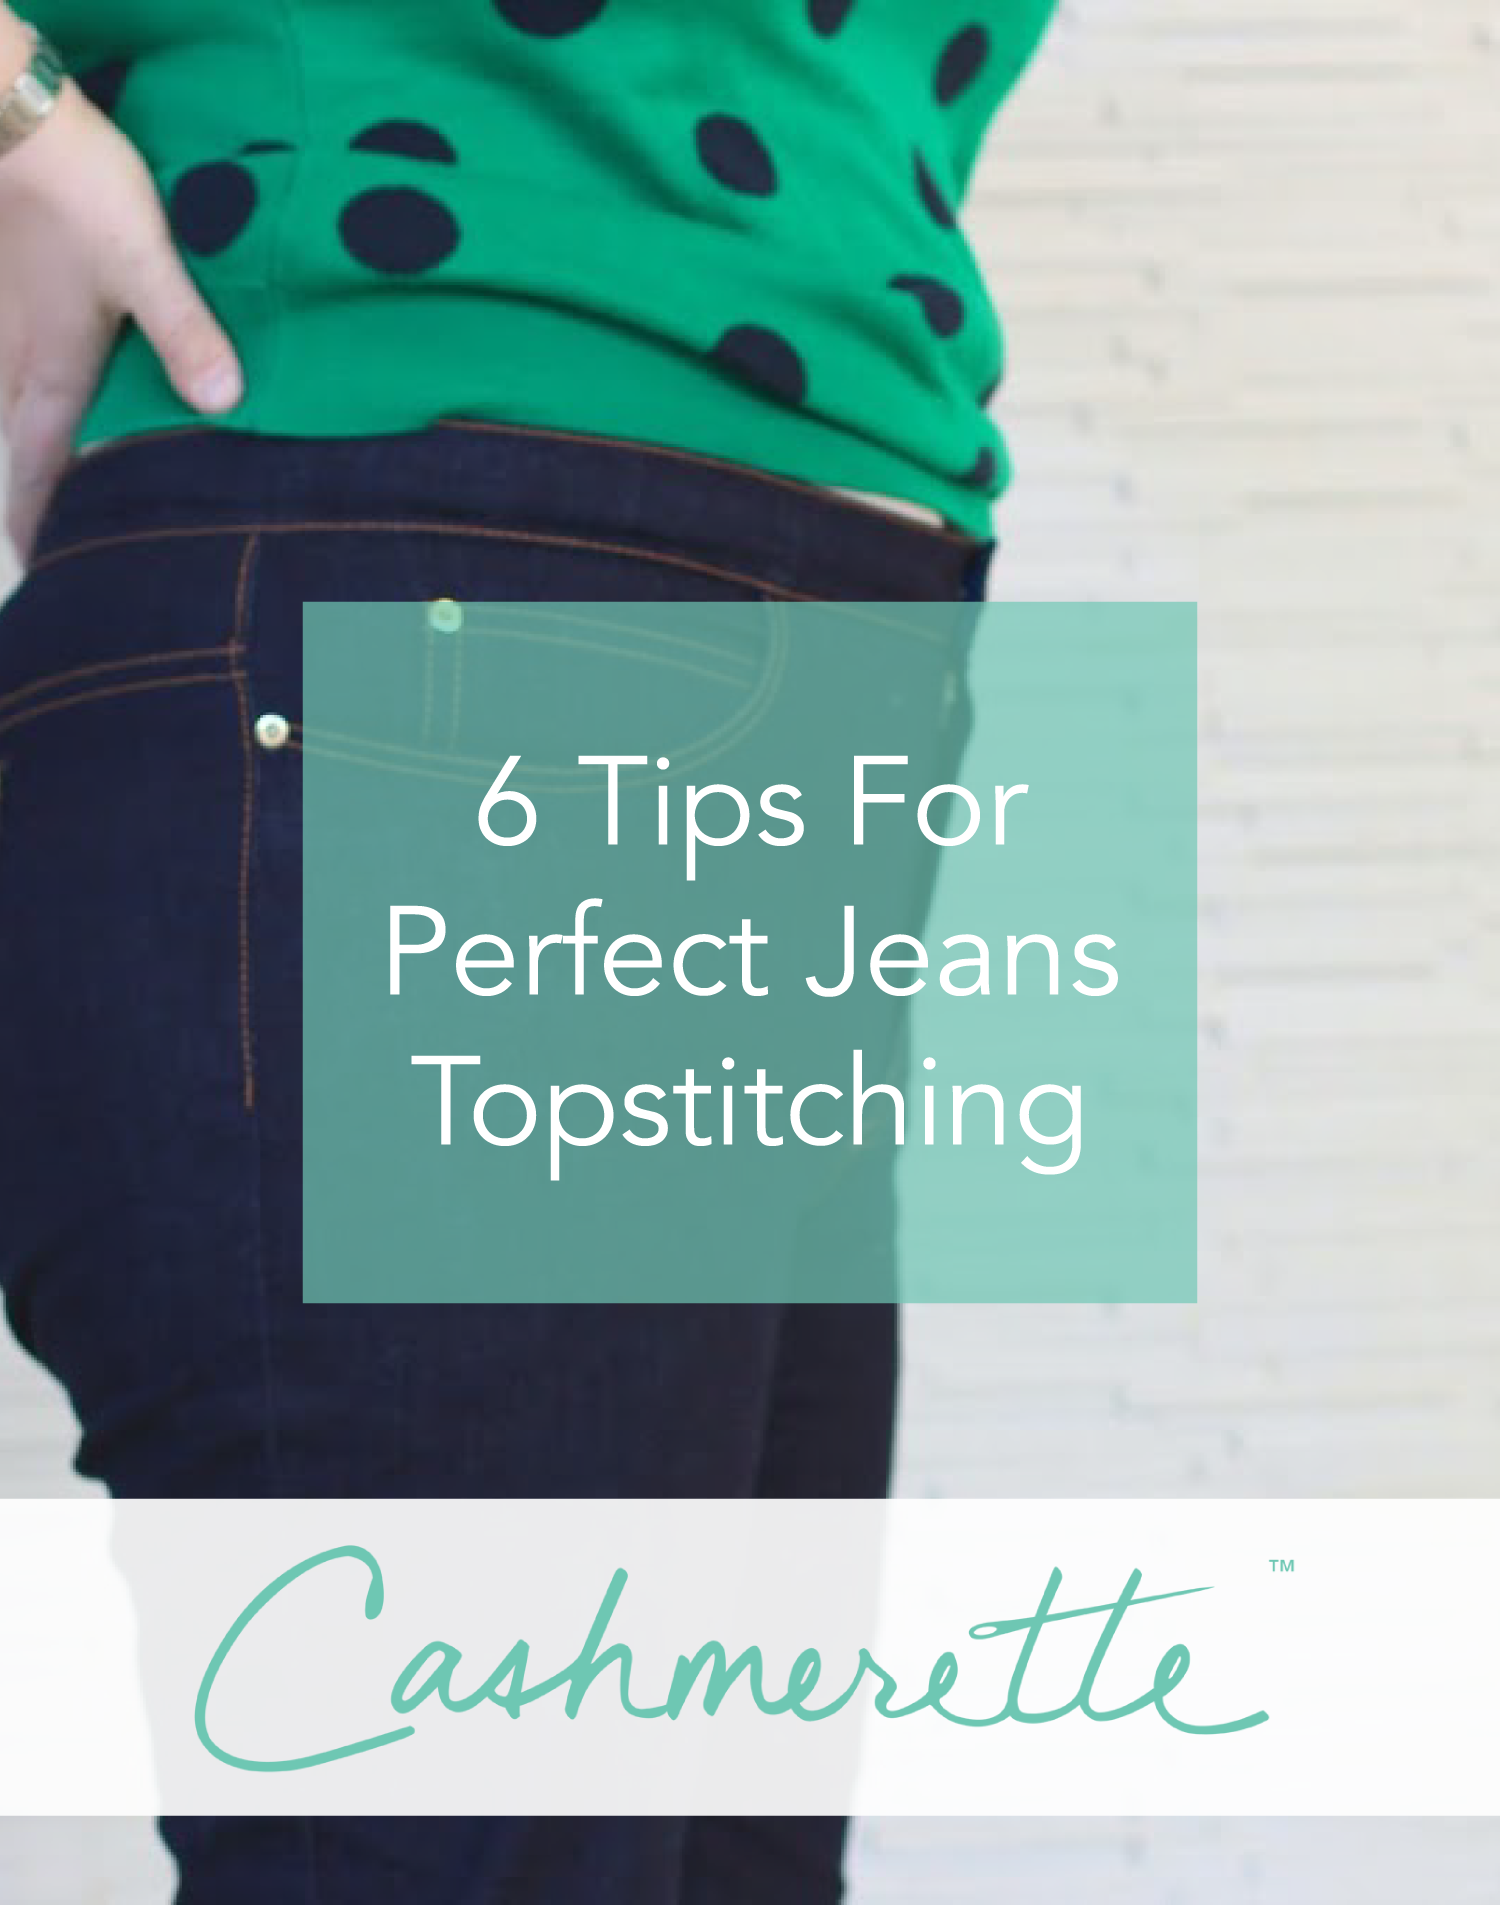 Kate's Tips and Tricks for Sewing with Denim - The Confident Stitch